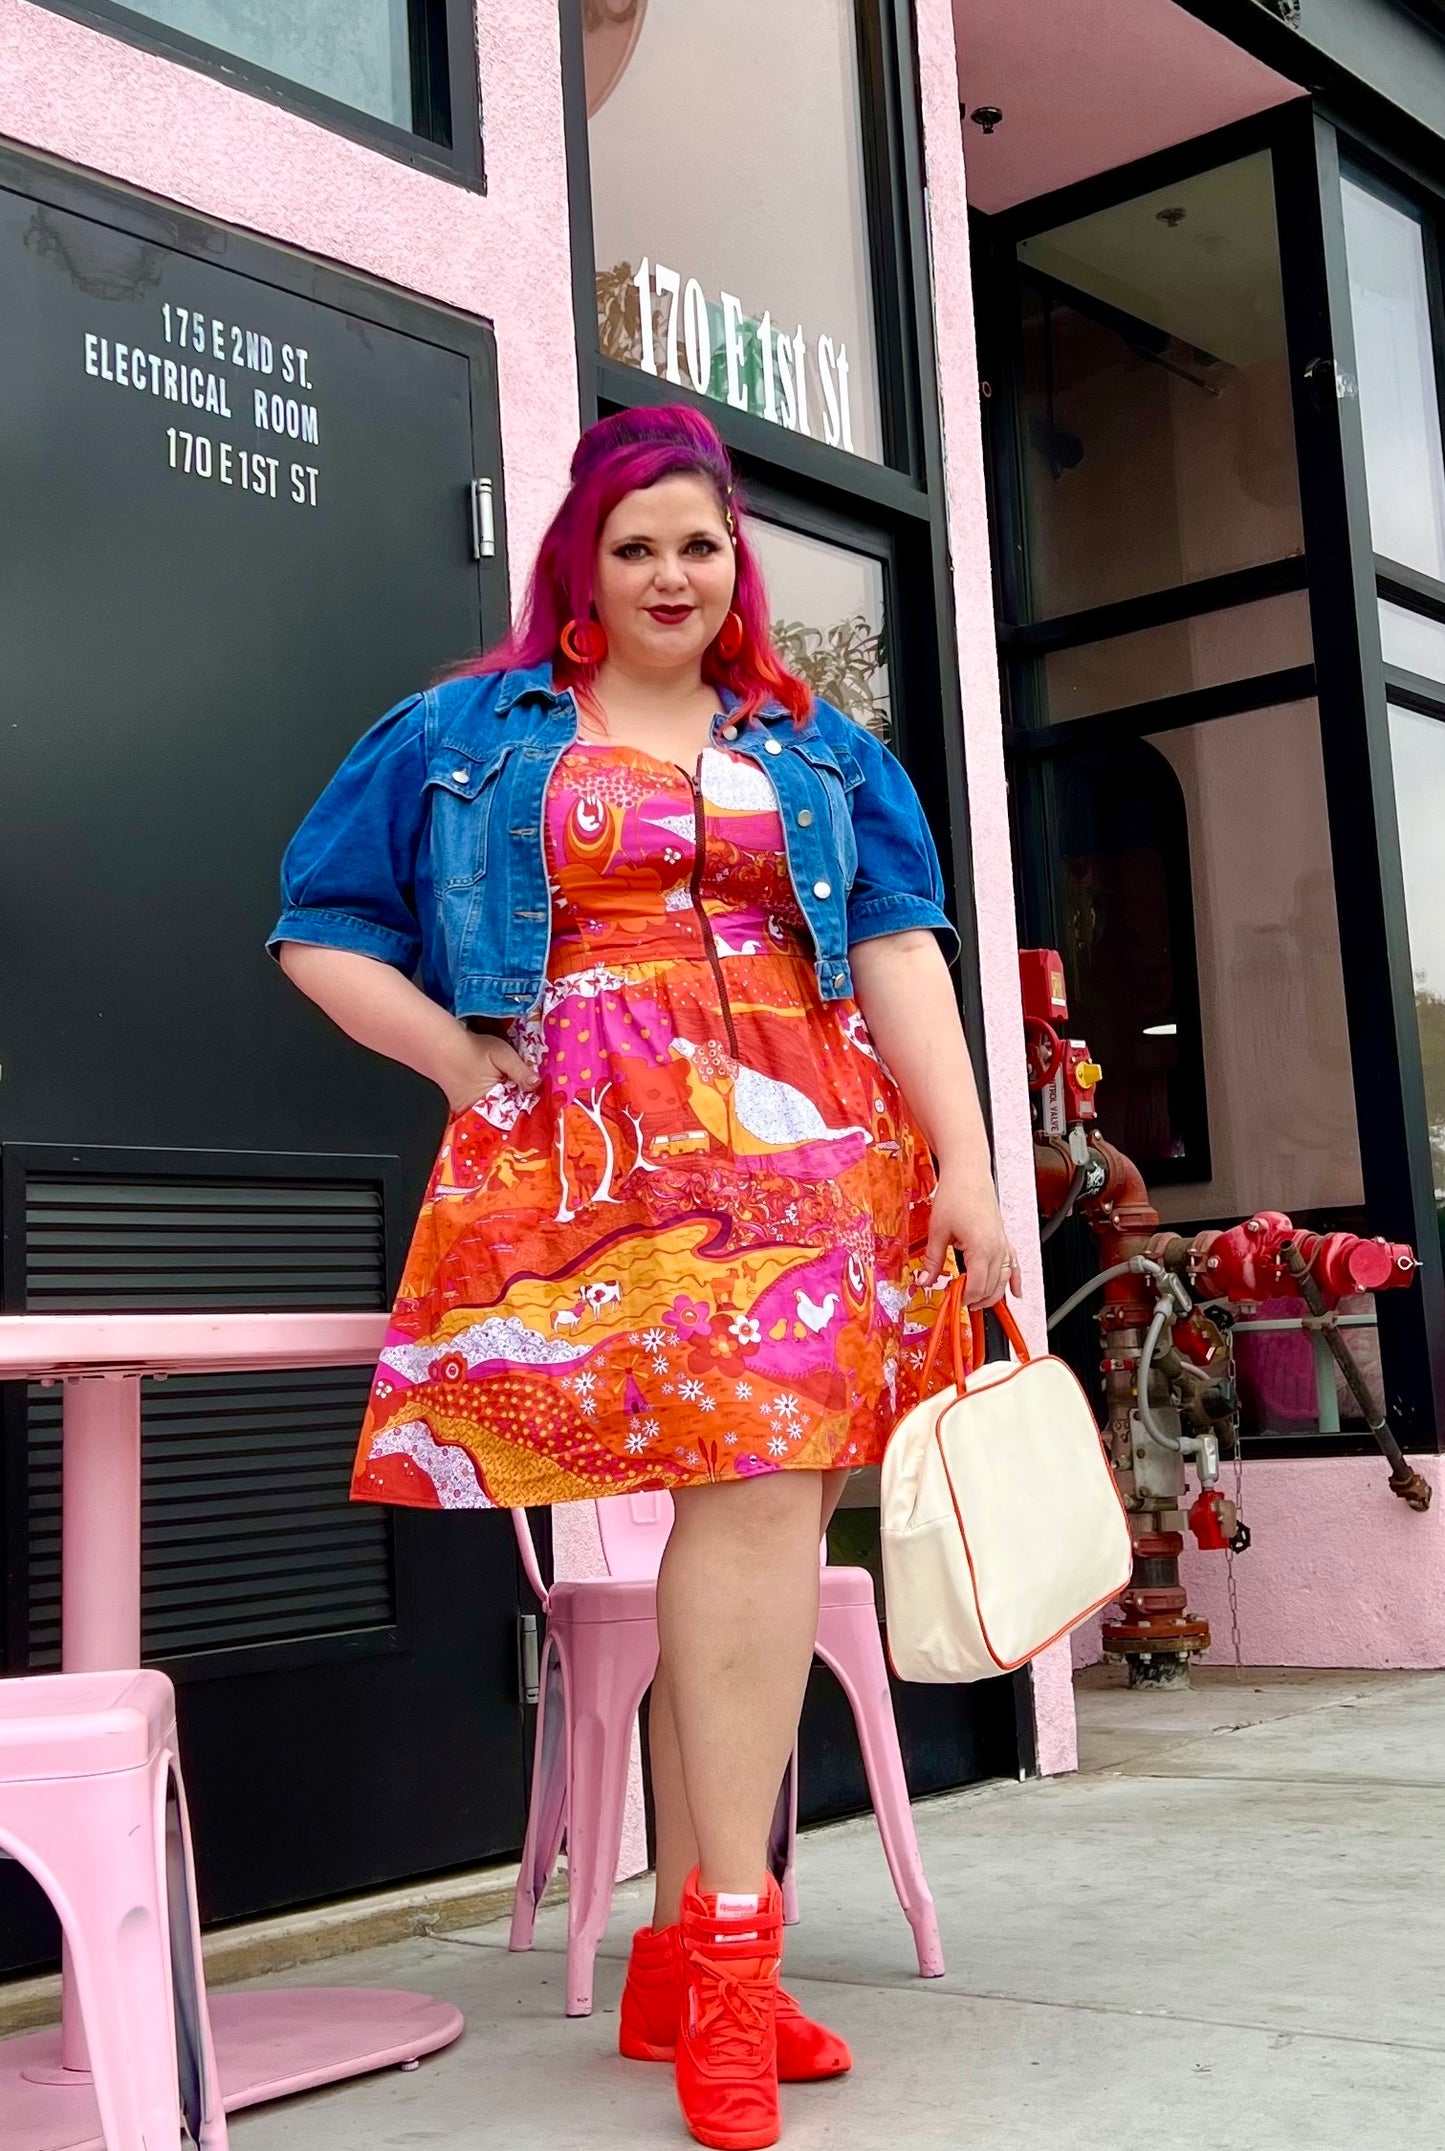 Pretty pink-haired model in bright red orange and pink dress with front zip, jean jacket and red shoes outside a coffee shop